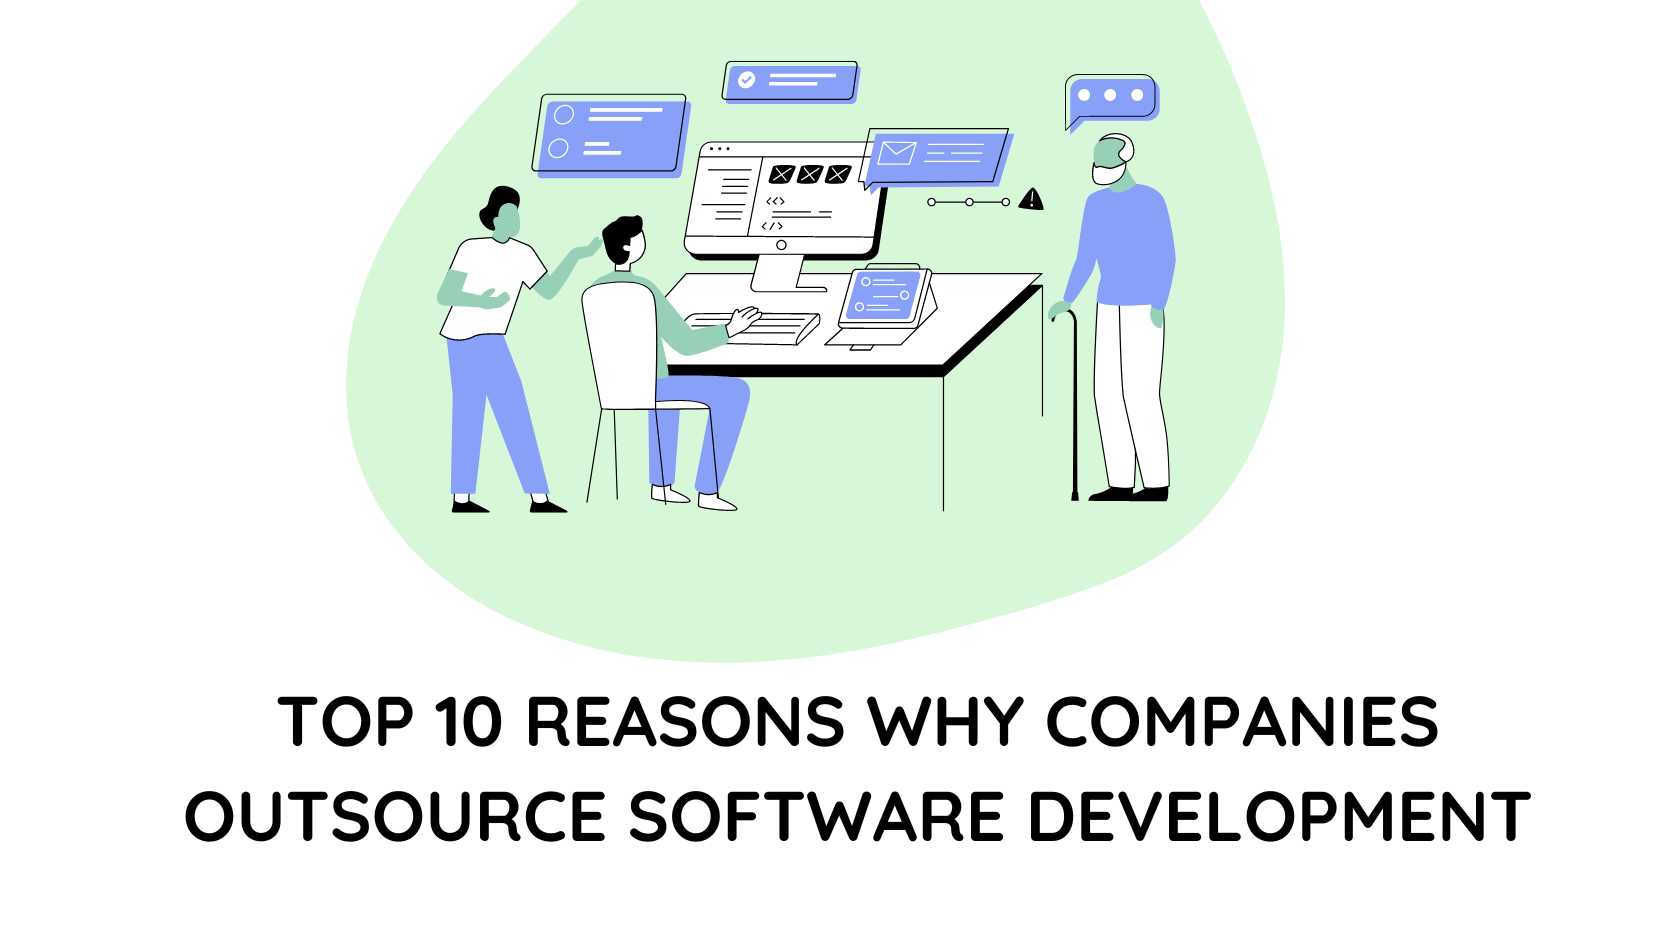 Top 10 Reasons Why Companies Outsource Software Development